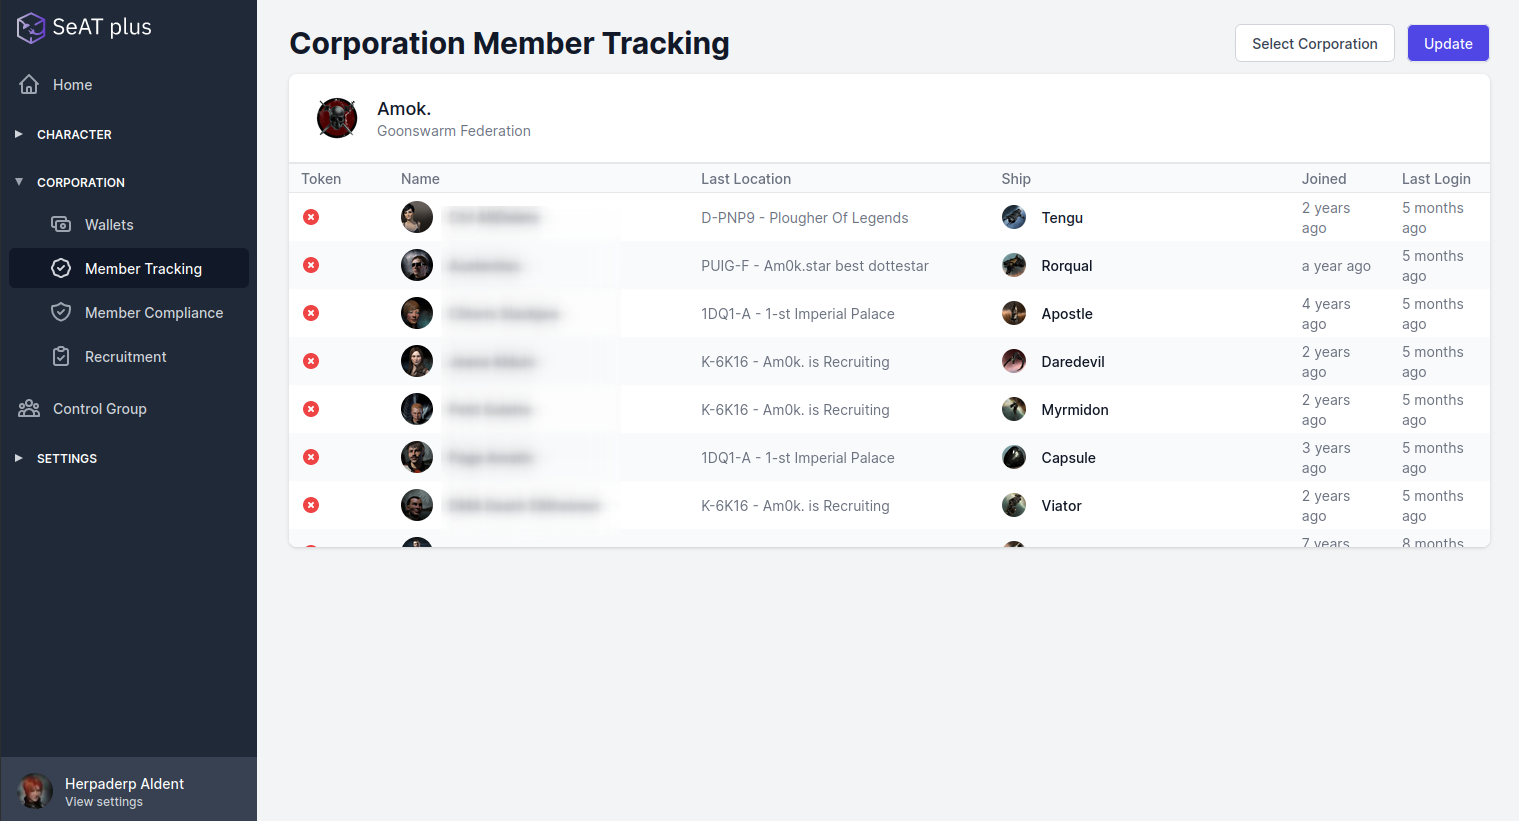 Corporation Member Tracking view